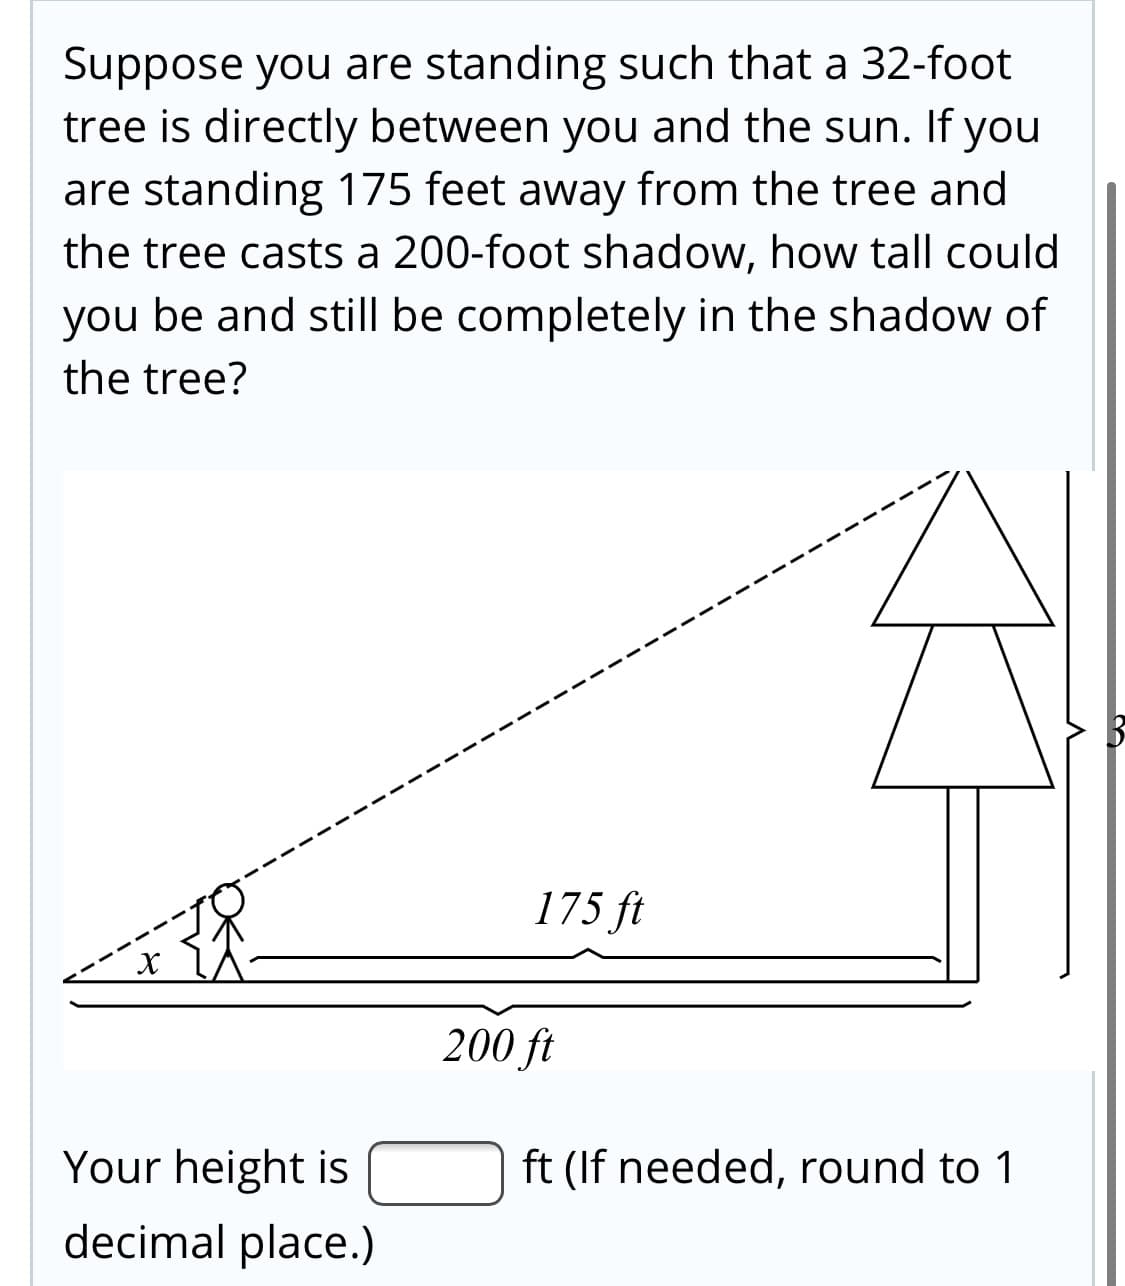 Suppose you are standing such that a 32-foot
tree is directly between you and the sun. If you
are standing 175 feet away from the tree and
the tree casts a 200-foot shadow, how tall could
you be and still be completely in the shadow of
the tree?
